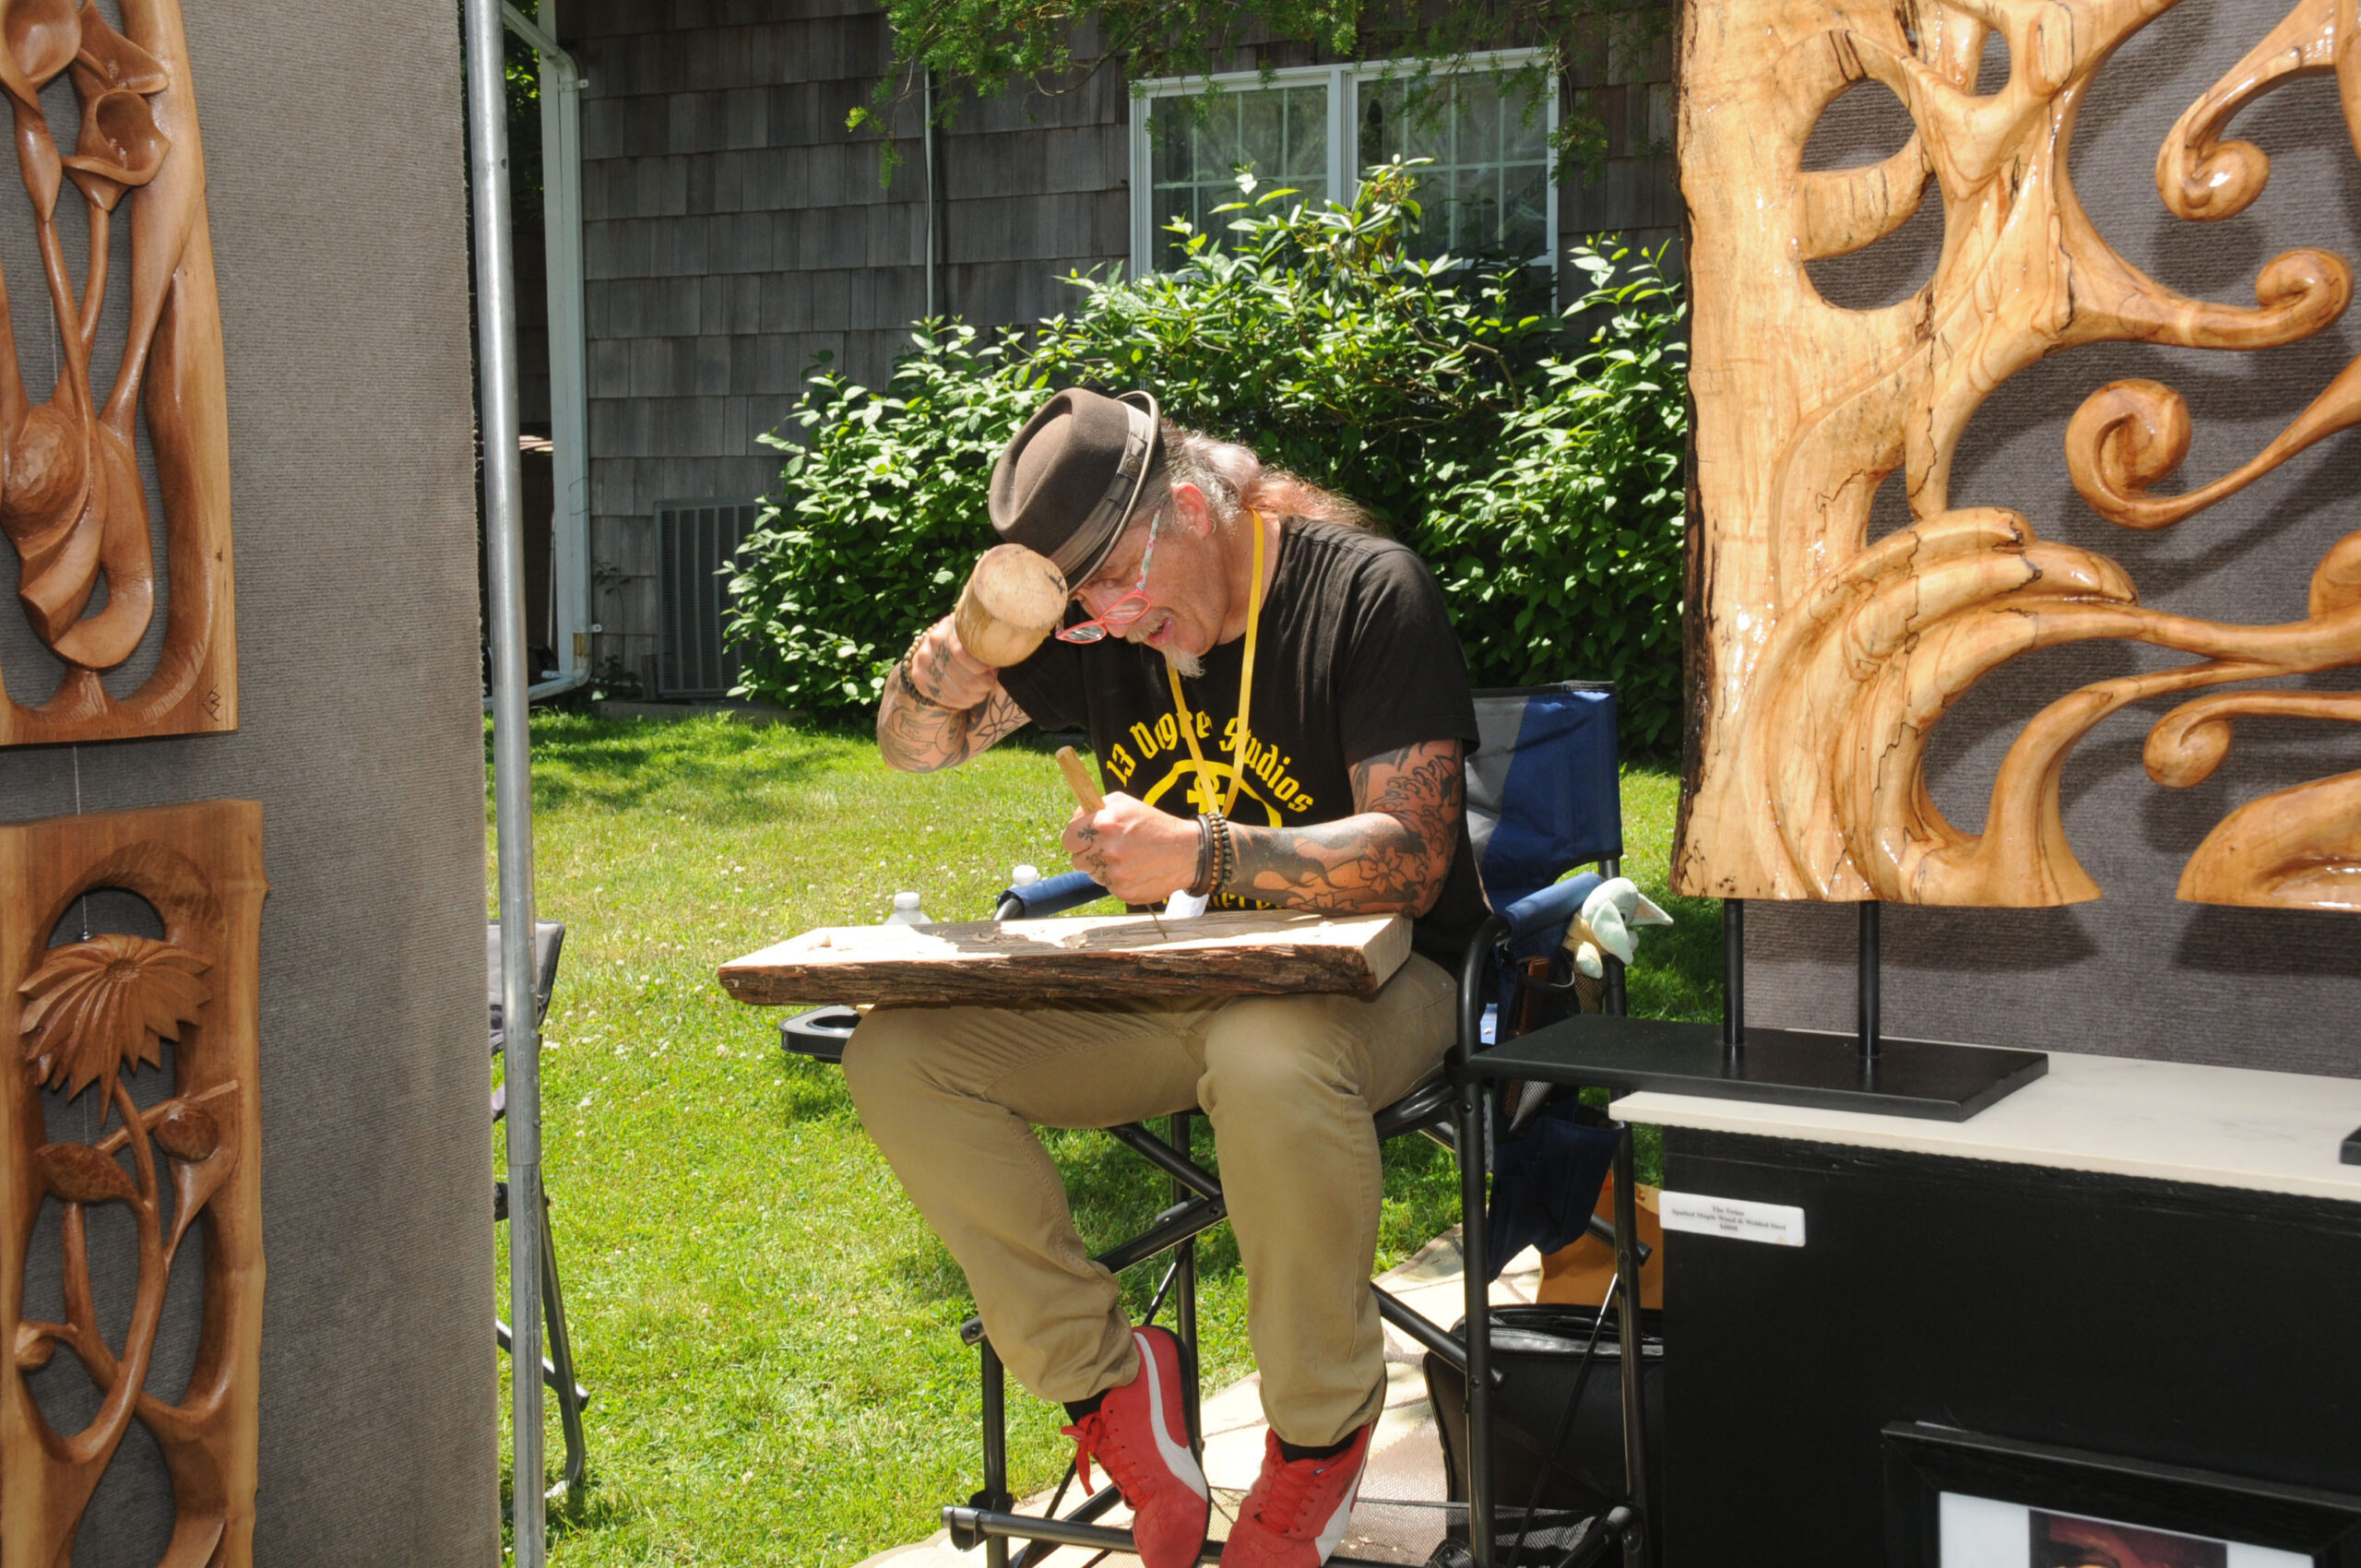 Artist Chris Buonomo works on a piece at the Amagansett Fine Arts Festival at the American Legion Post grounds in Amagansett this weekend. Visitors browsed and purchased works by dozens of artists in a variety of media, including painting, photography, jewelry and more.   RICHARD LEWIN